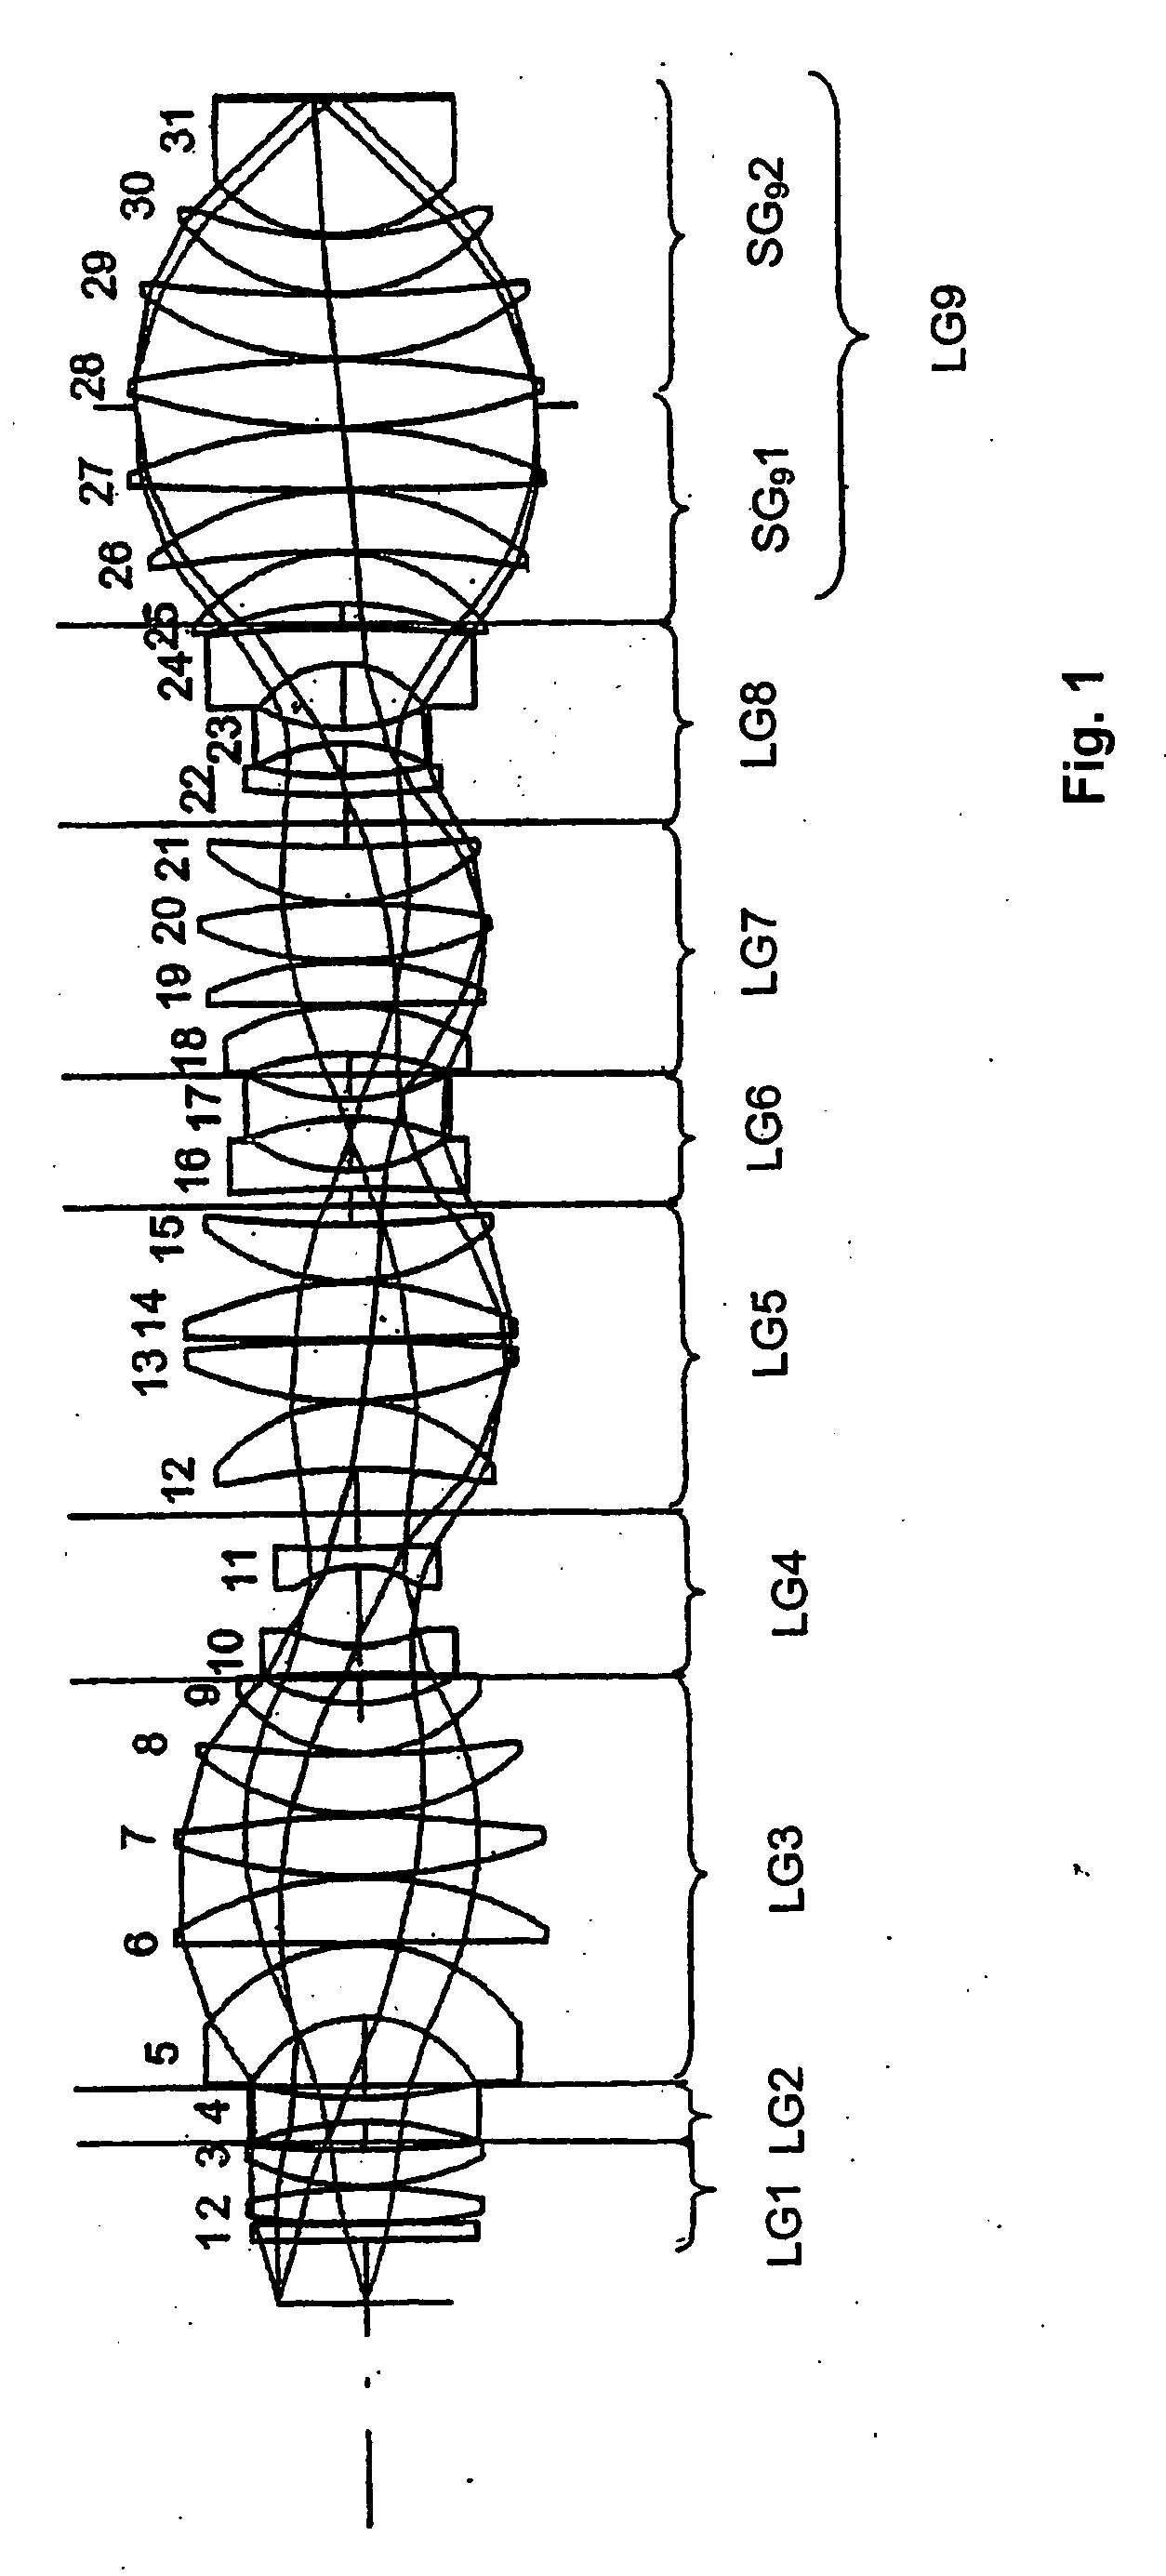 Projection optical system and method